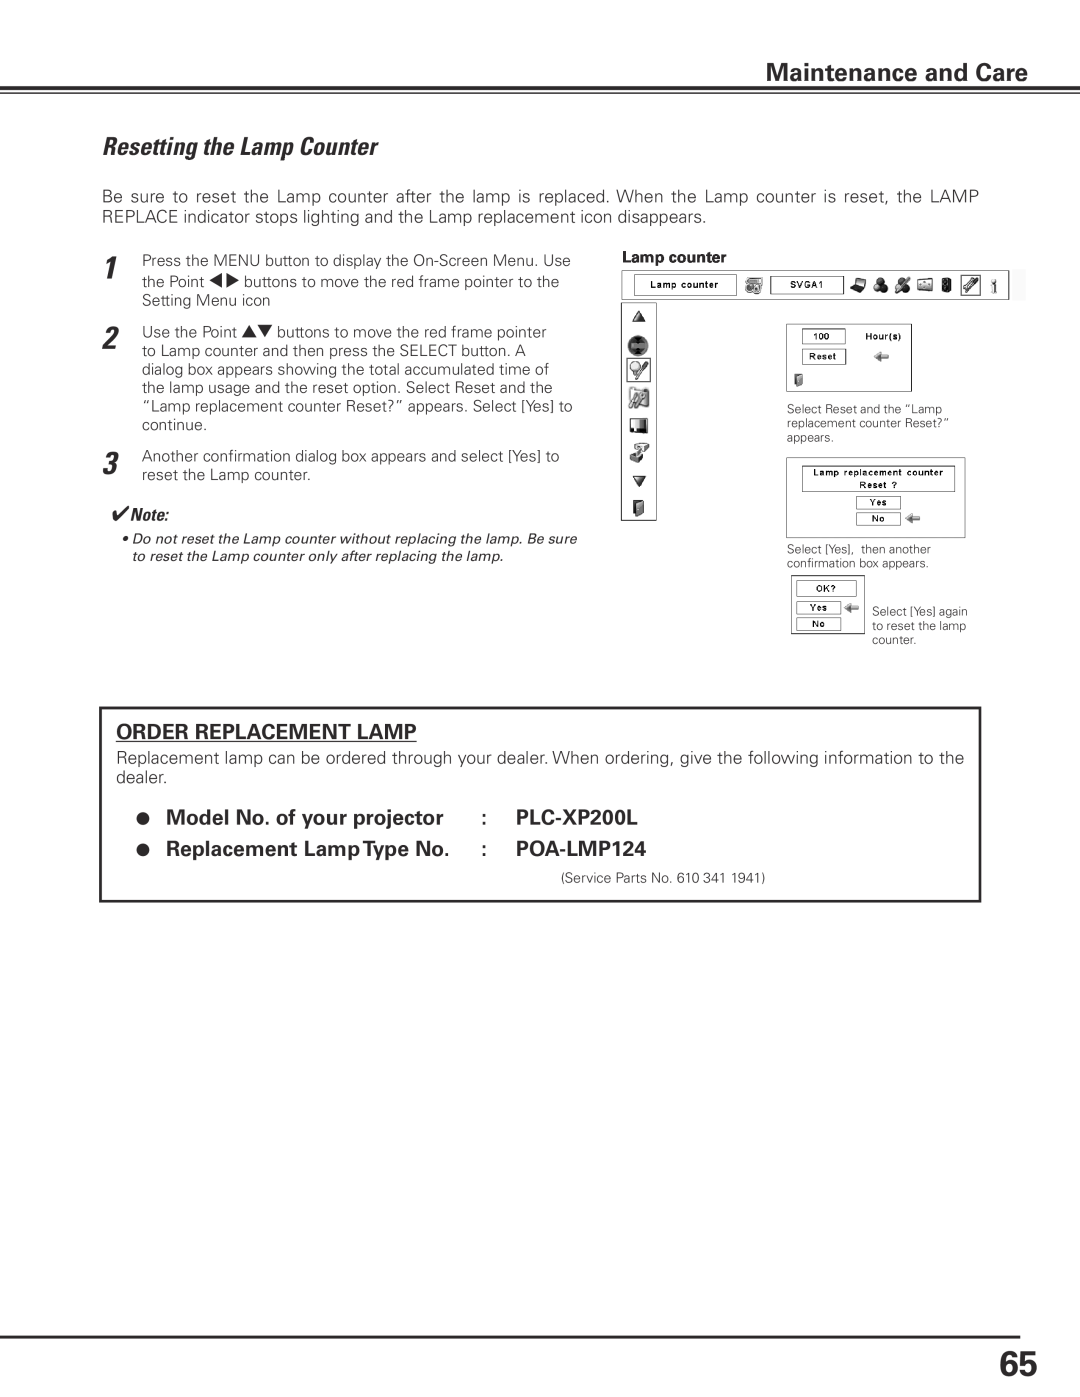 Sanyo PLC-XP200L owner manual Resetting the Lamp Counter, Maintenance and Care, Order Replacement Lamp 